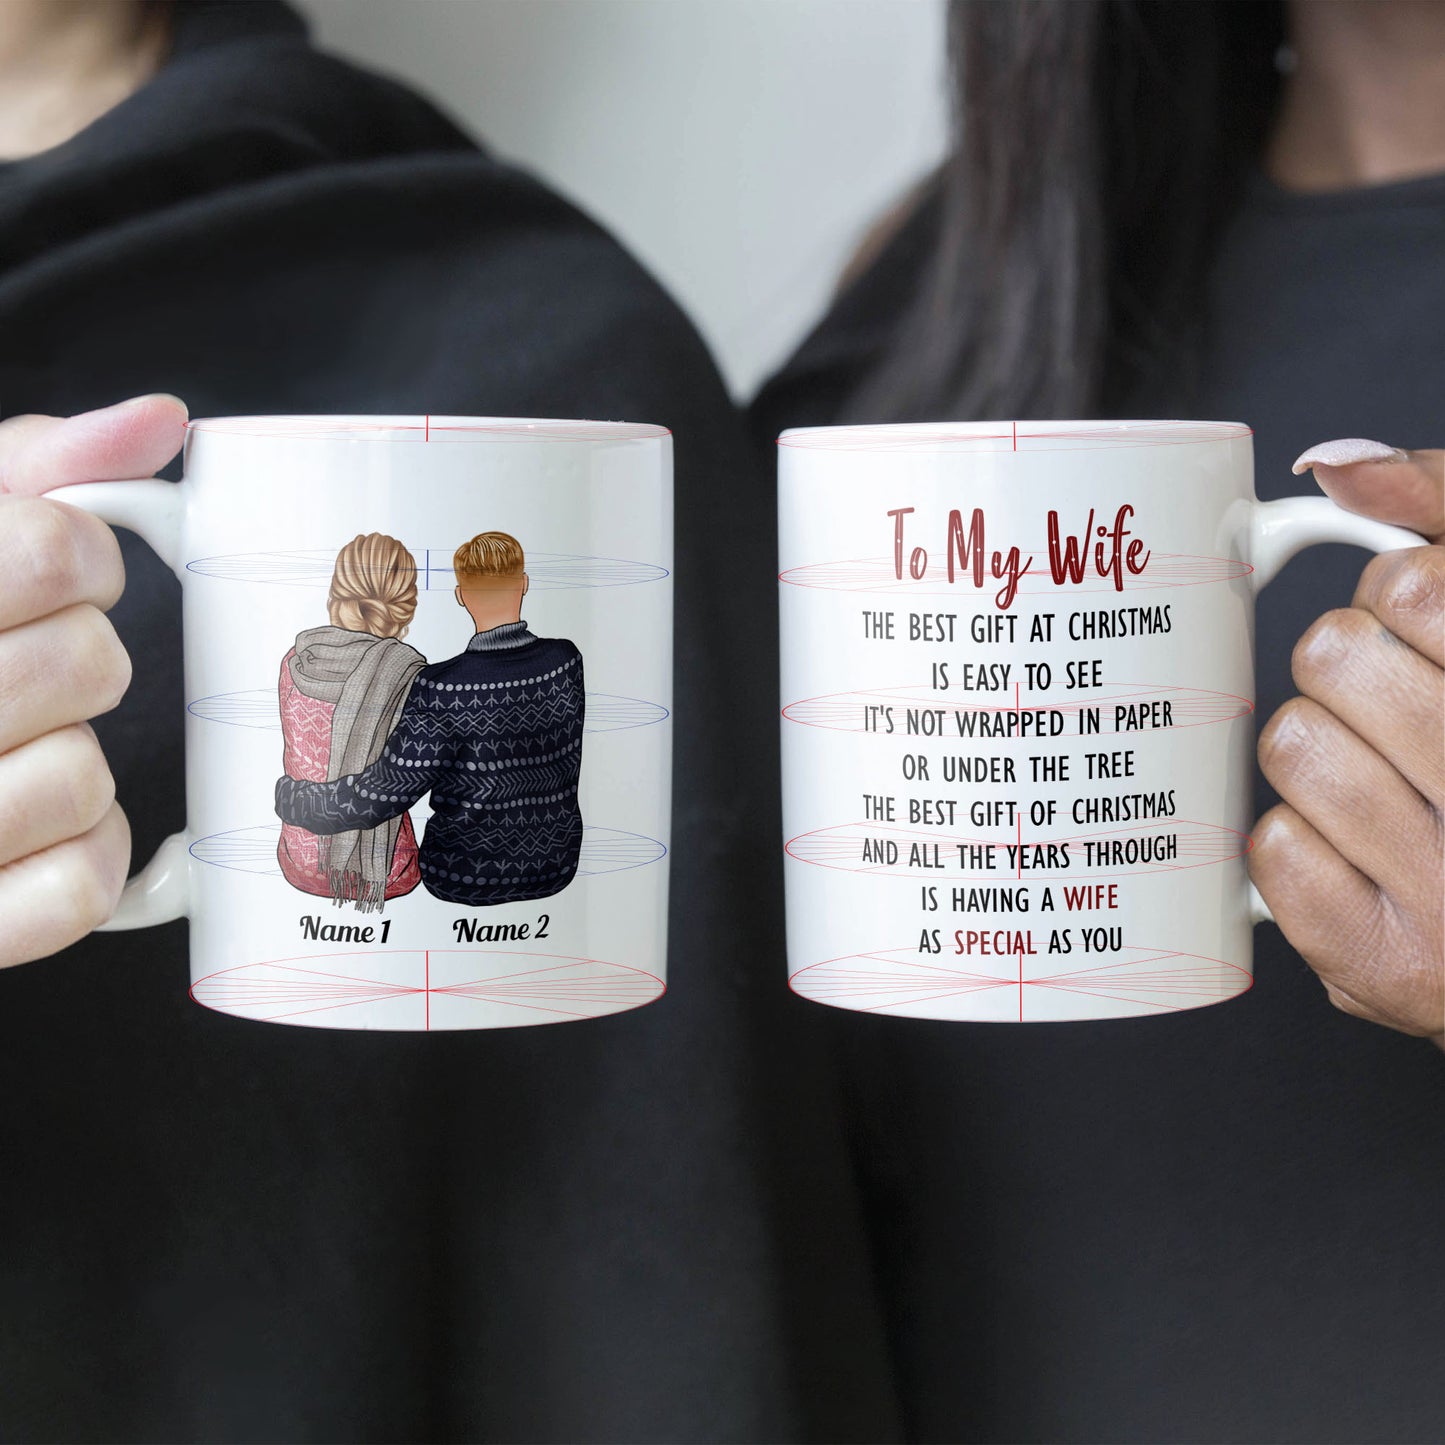 The Best Gift At Christmas Is Easy To See - Personalized Mug - Anniversary Gift For Wife, Wifey